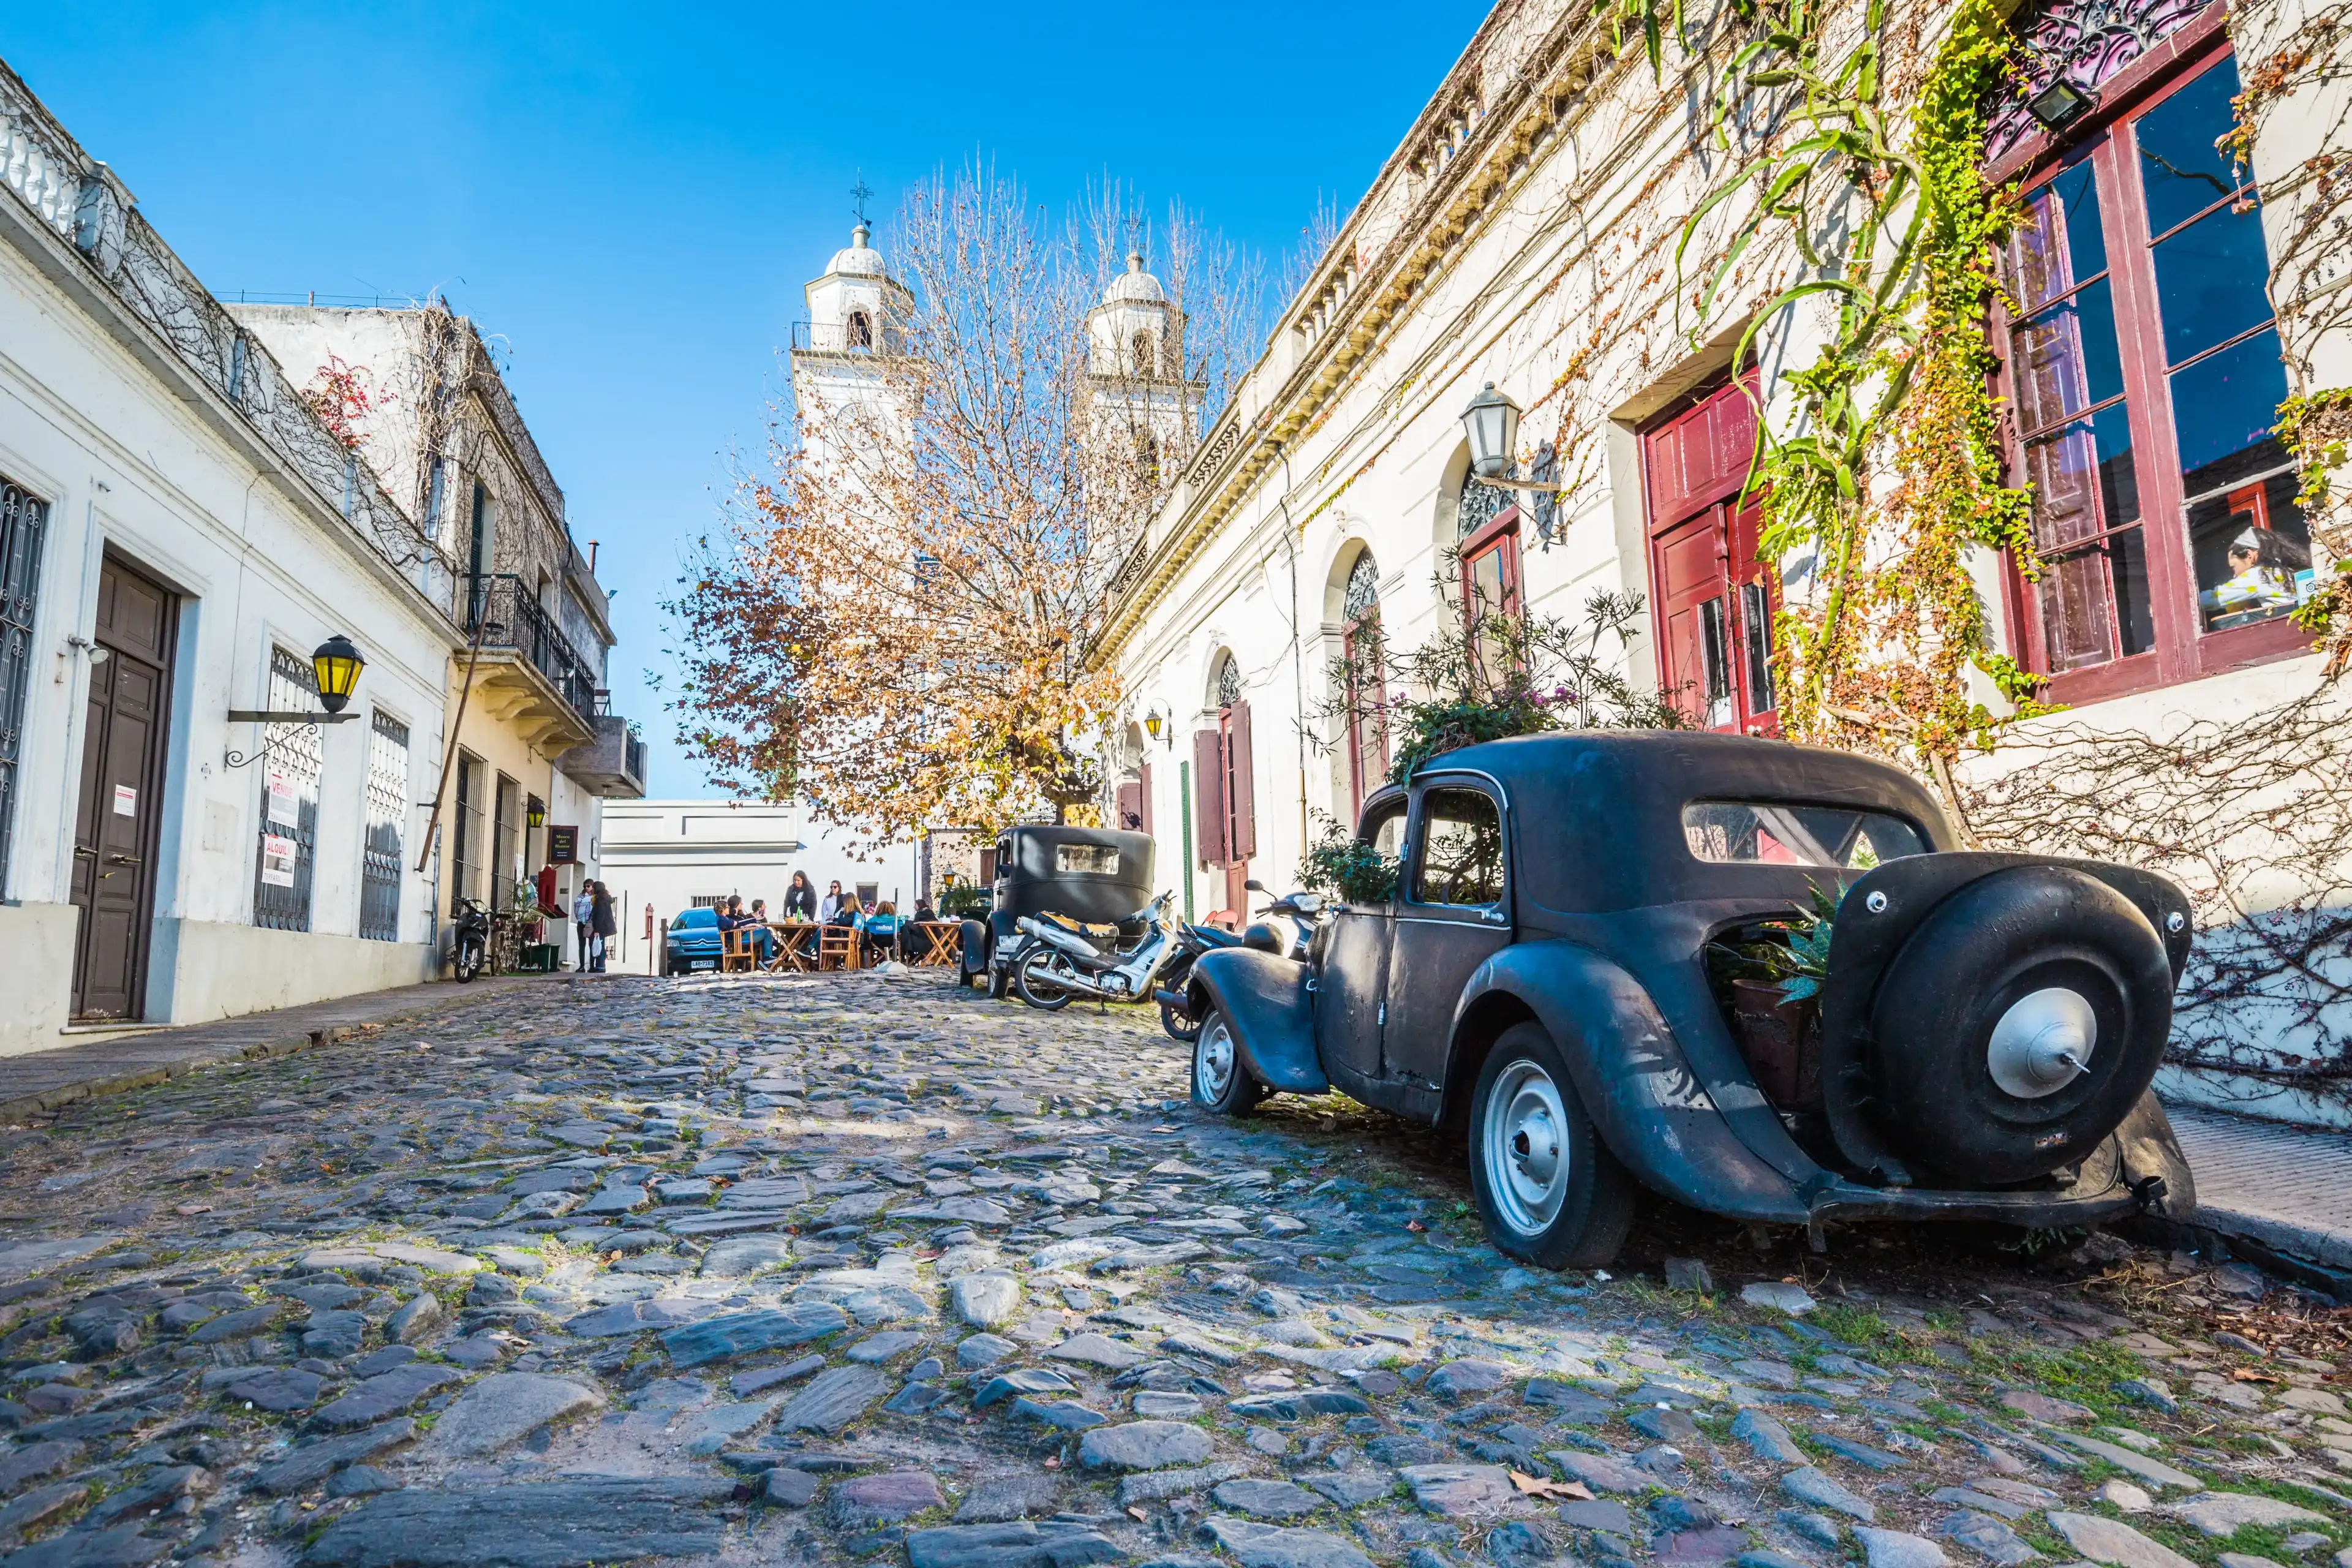 Colonia hotels. Best hotels in Colonia, Uruguay